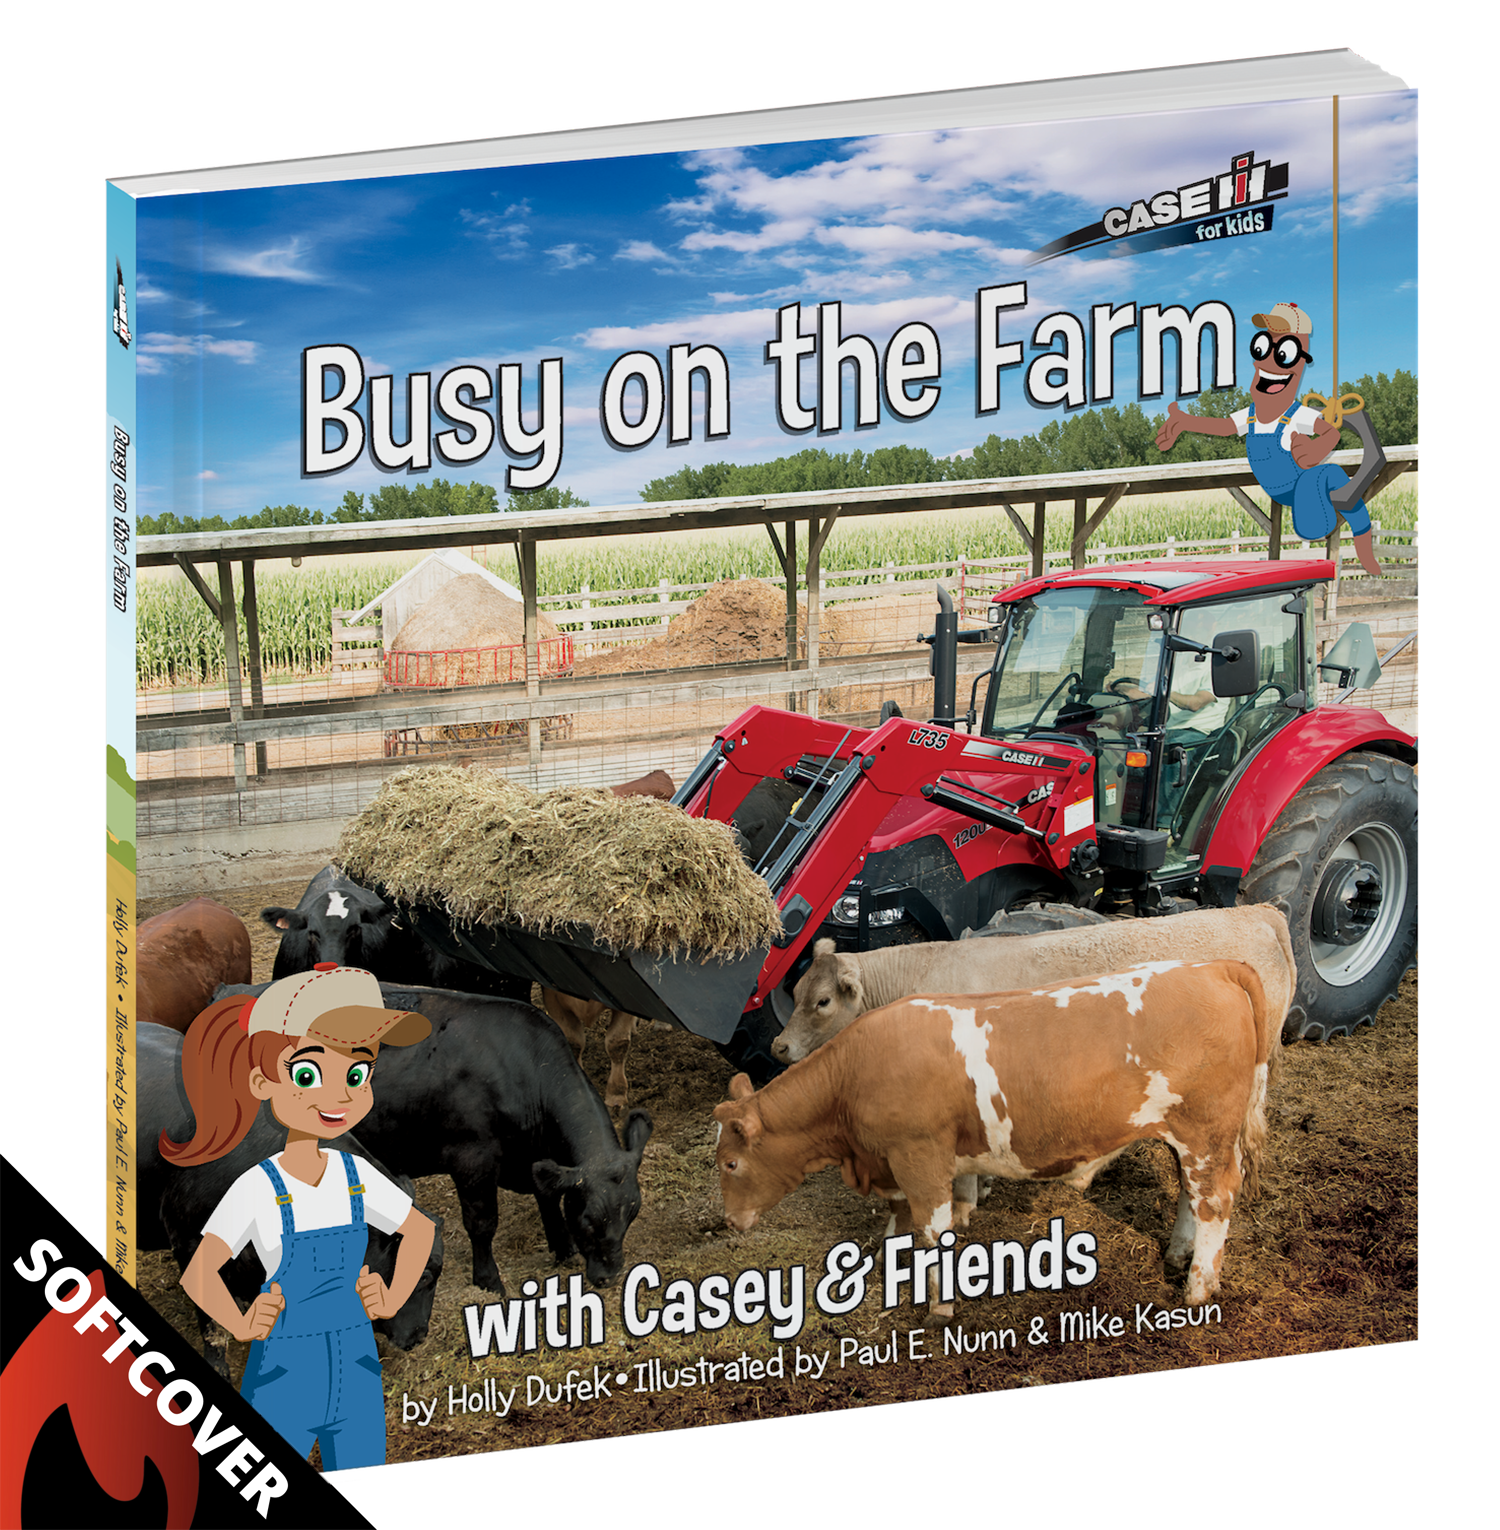 Busy on the Farm: with Casey & Friends